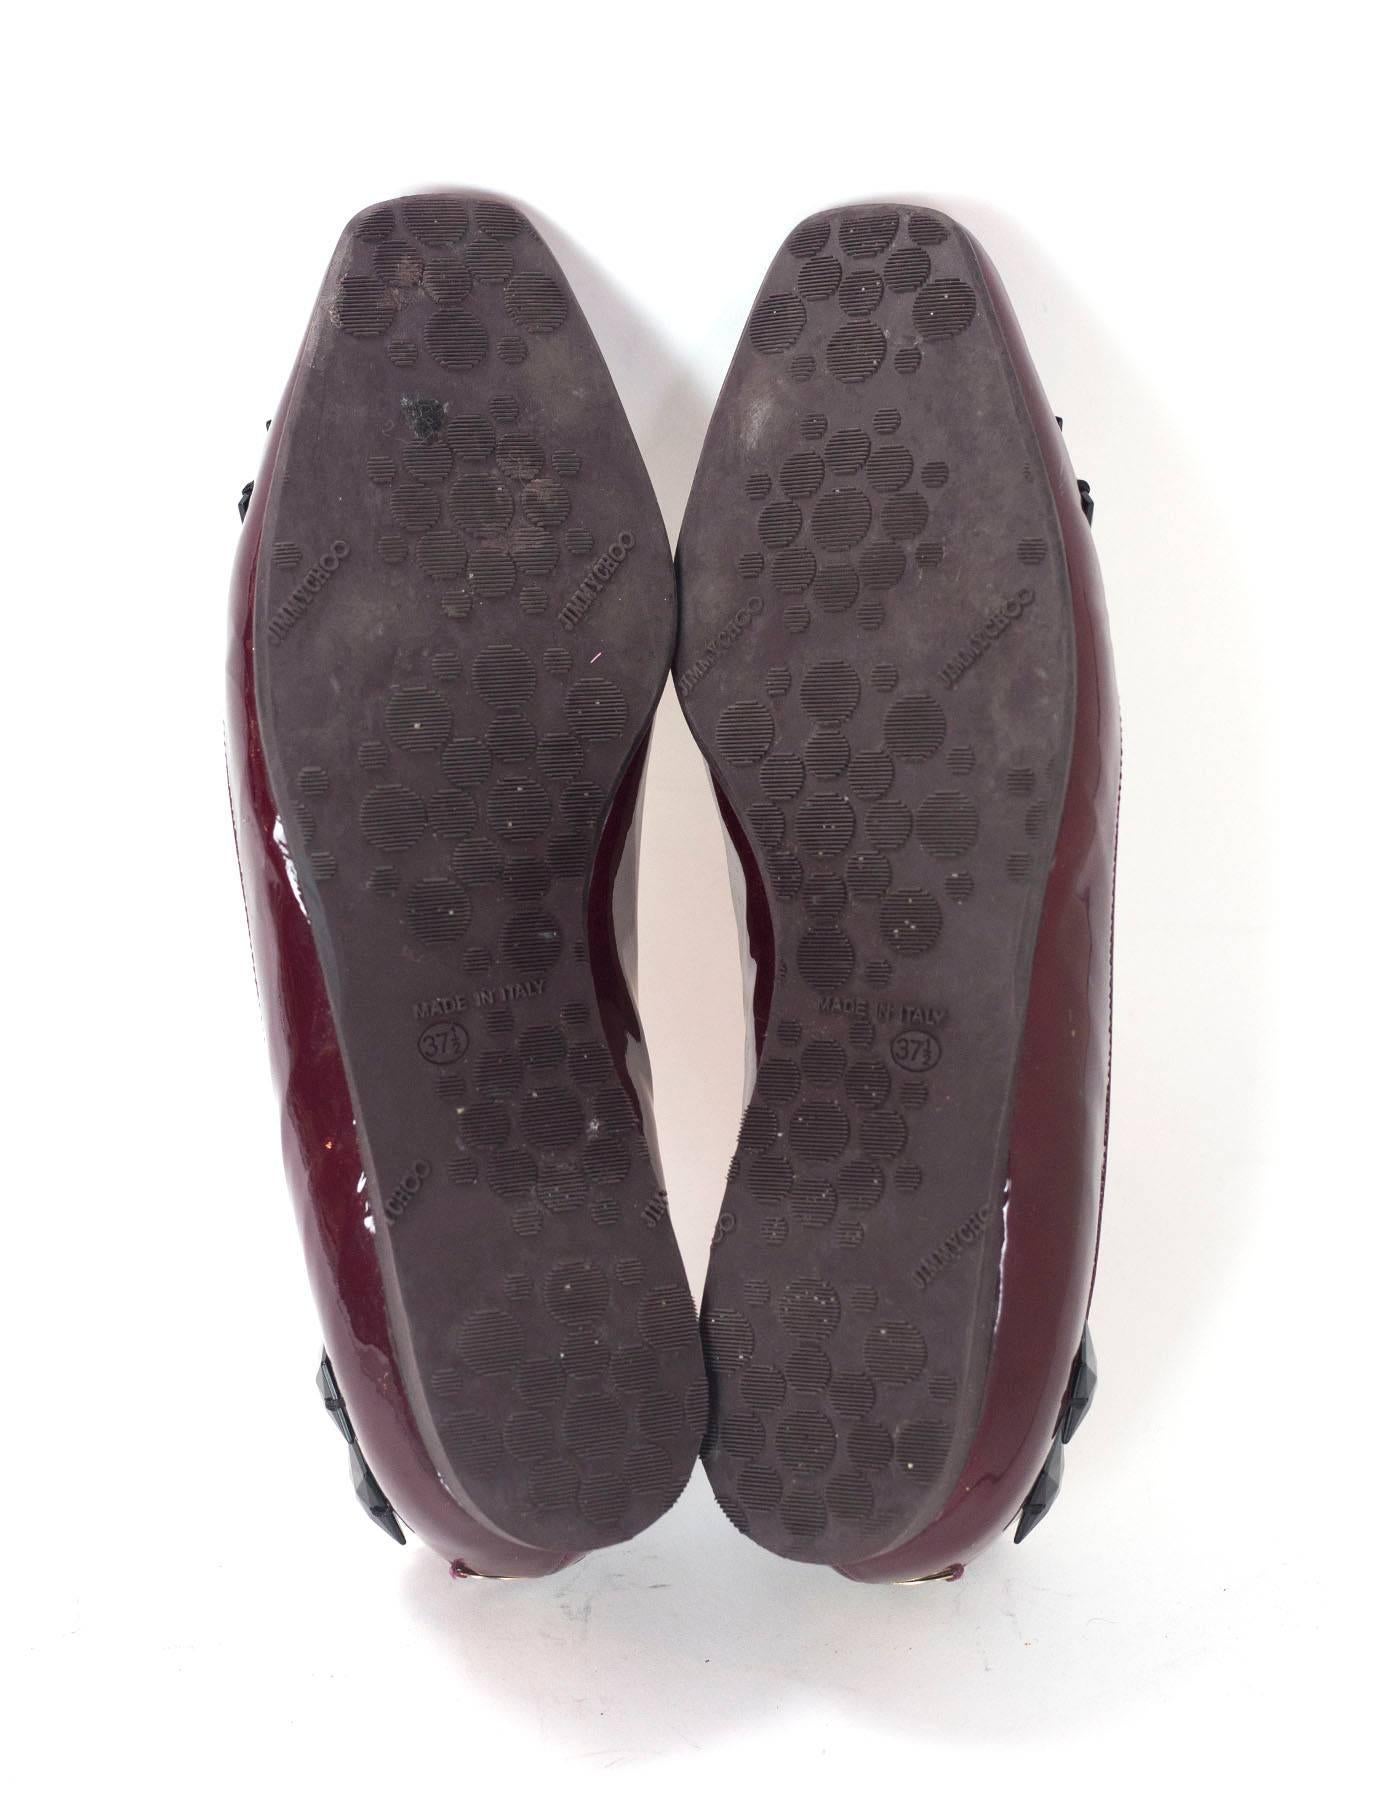 Jimmy Choo Burgundy Patent Leather Flats With Studs Sz 37.5 1